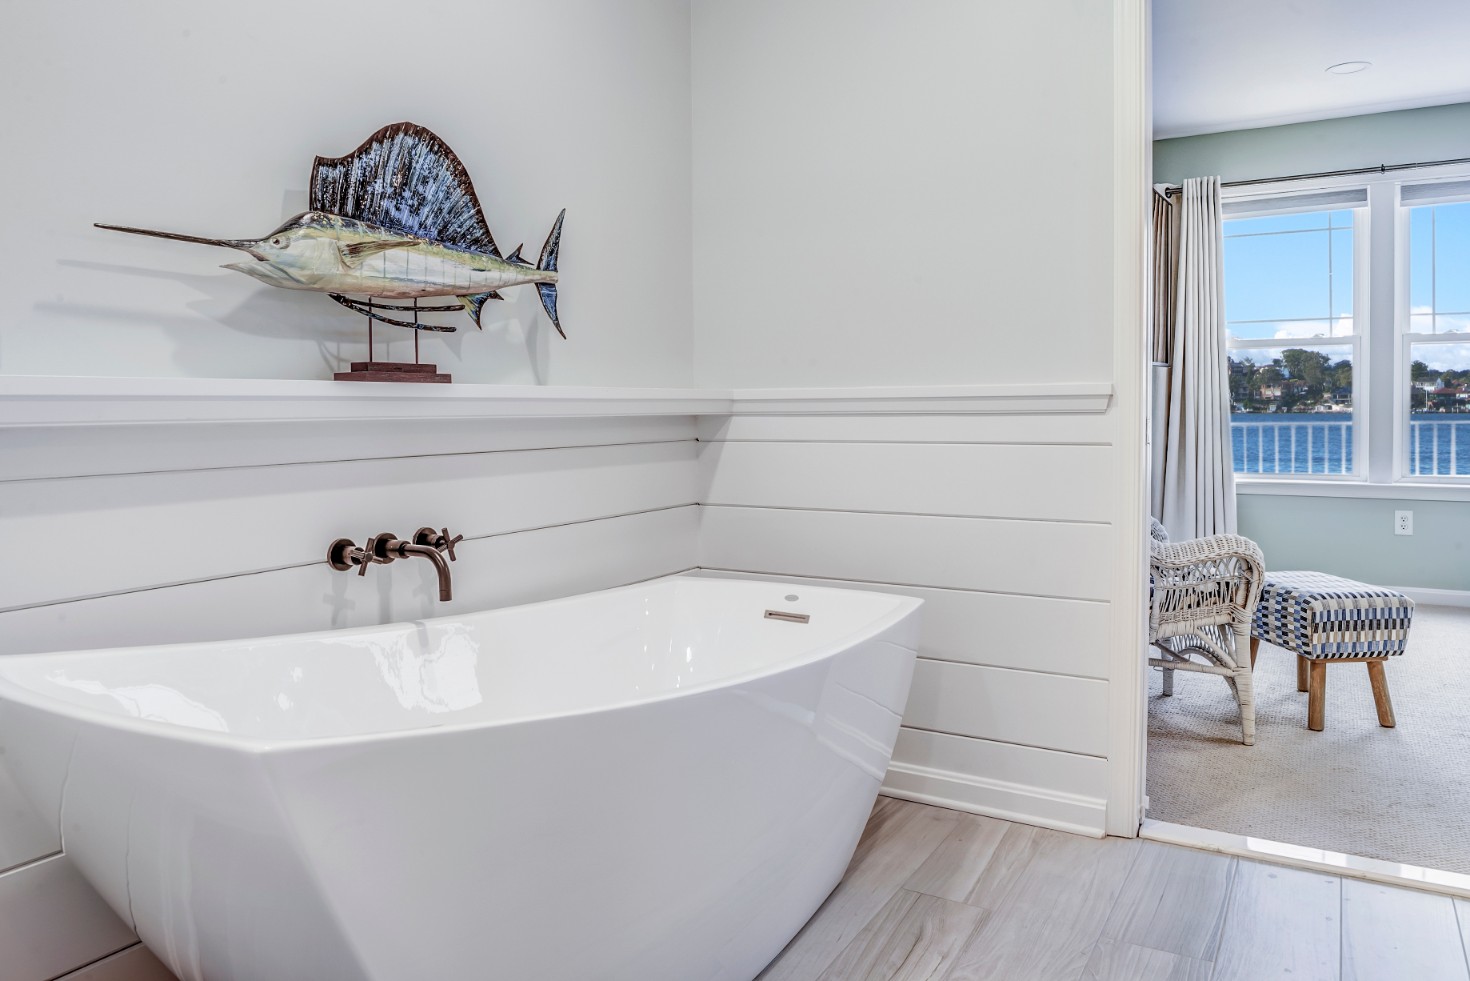 Hatteras Drive Bathroom Remodel in Bethany Beach DE - Master Bathroom with White Free Standing Bathtub and Marlin